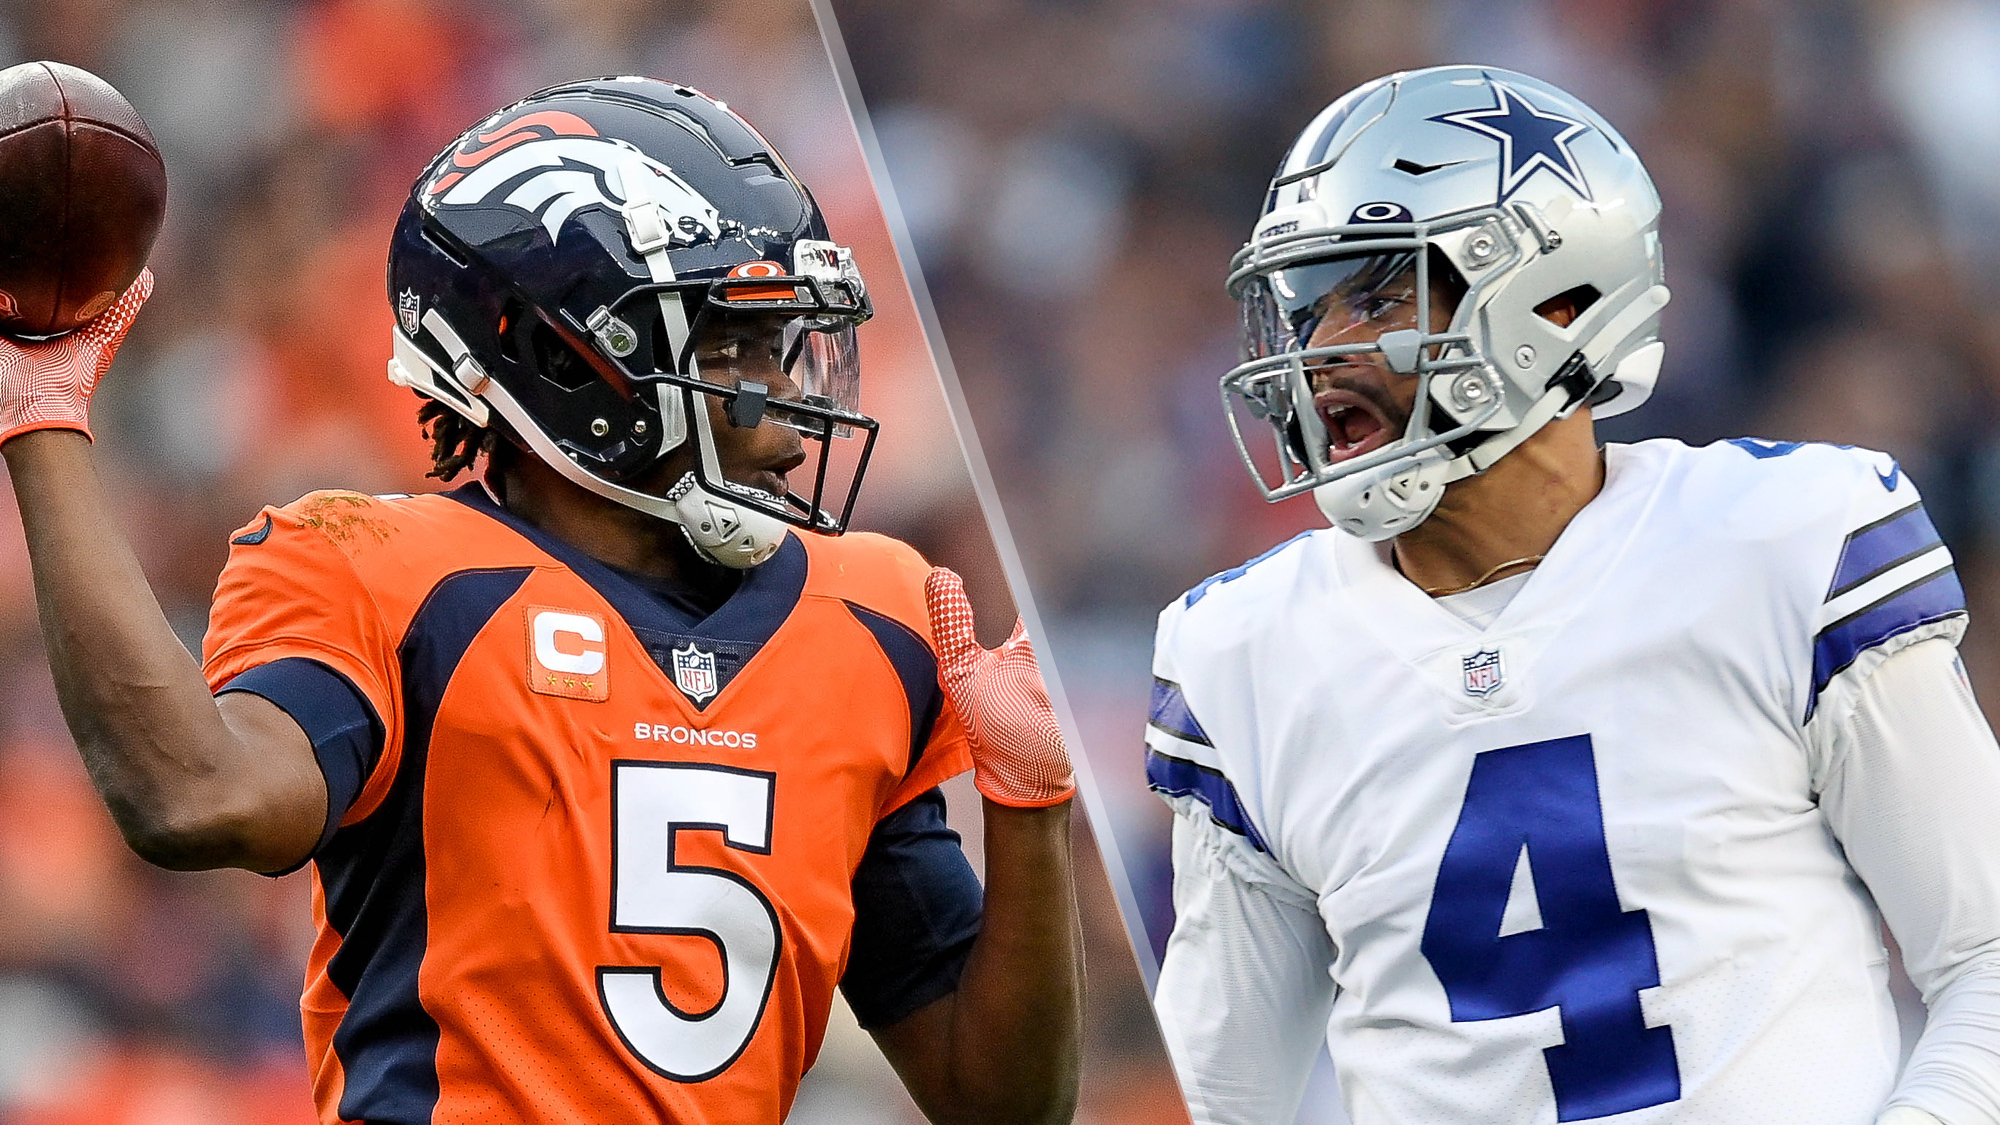 Broncos vs Cowboys live stream is today: How to watch NFL Week 9